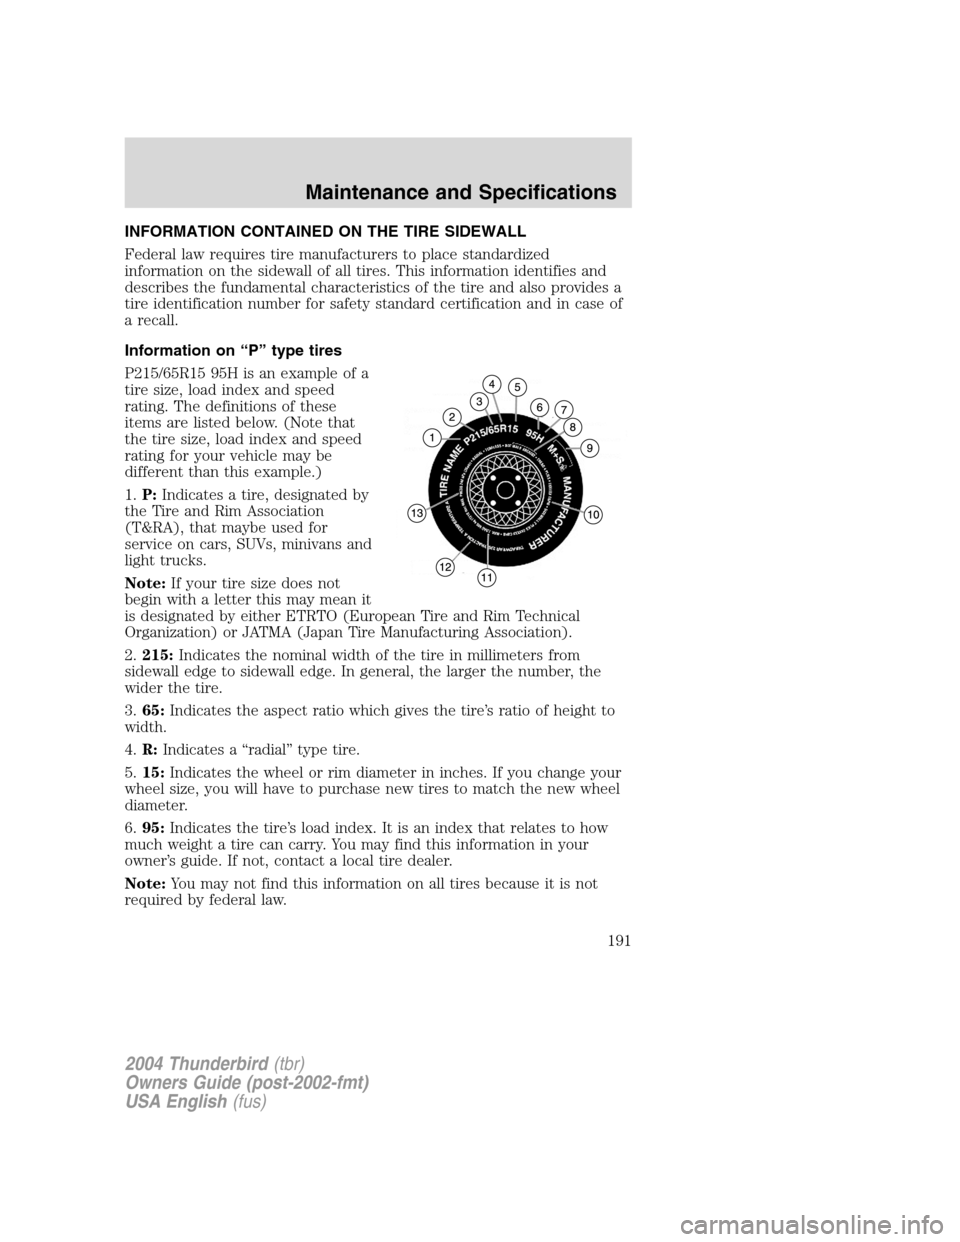 FORD THUNDERBIRD 2004 11.G Owners Manual INFORMATION CONTAINED ON THE TIRE SIDEWALL
Federal law requires tire manufacturers to place standardized
information on the sidewall of all tires. This information identifies and
describes the fundame